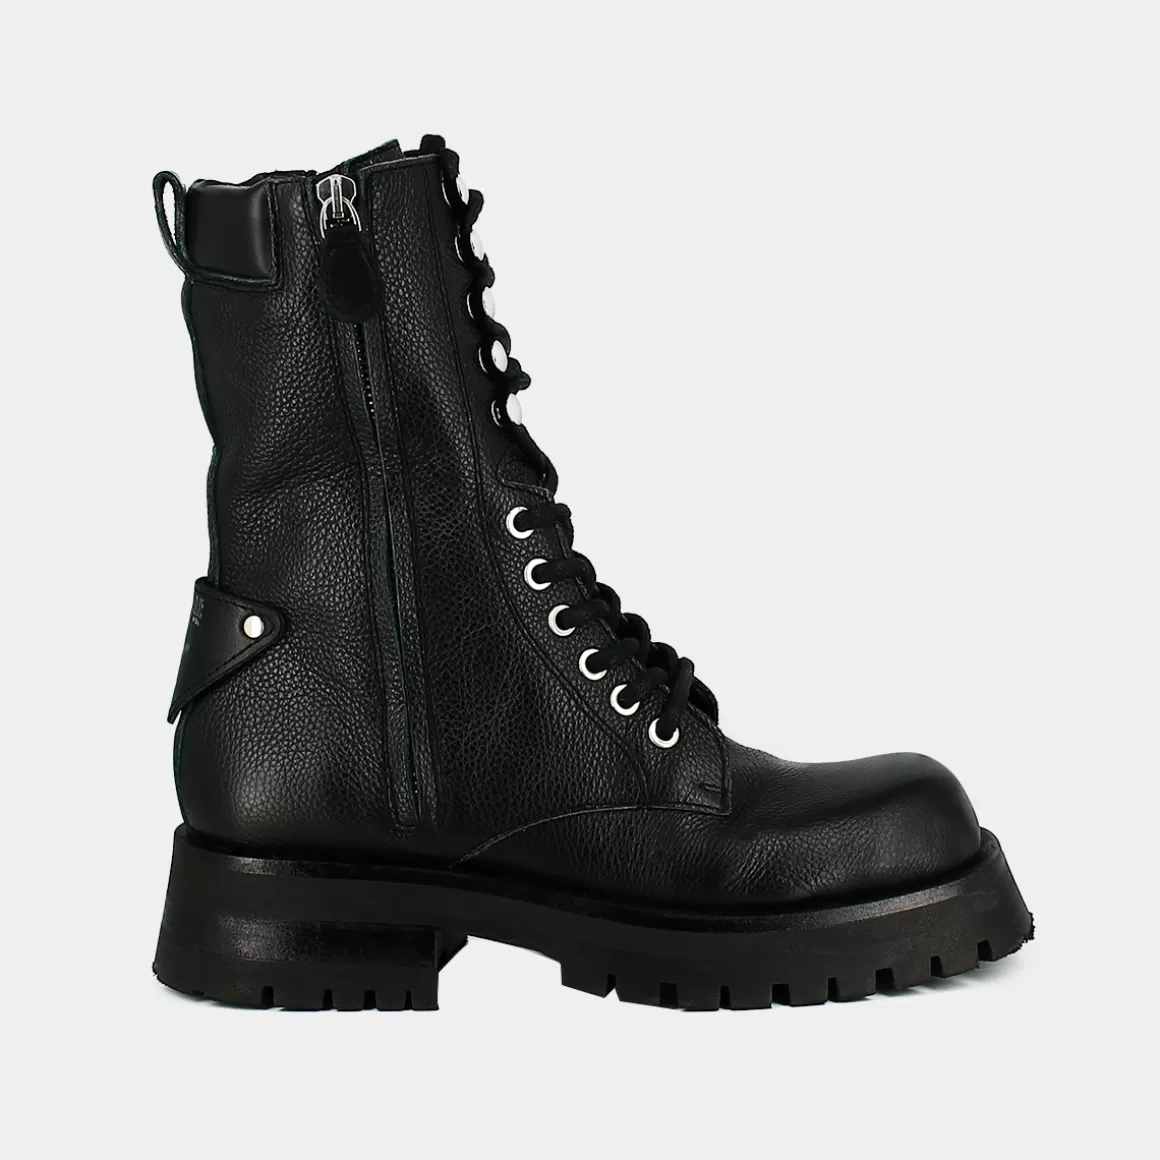 Ranger ankle boots with laces, zips and square toes - x Schott<Jonak Shop